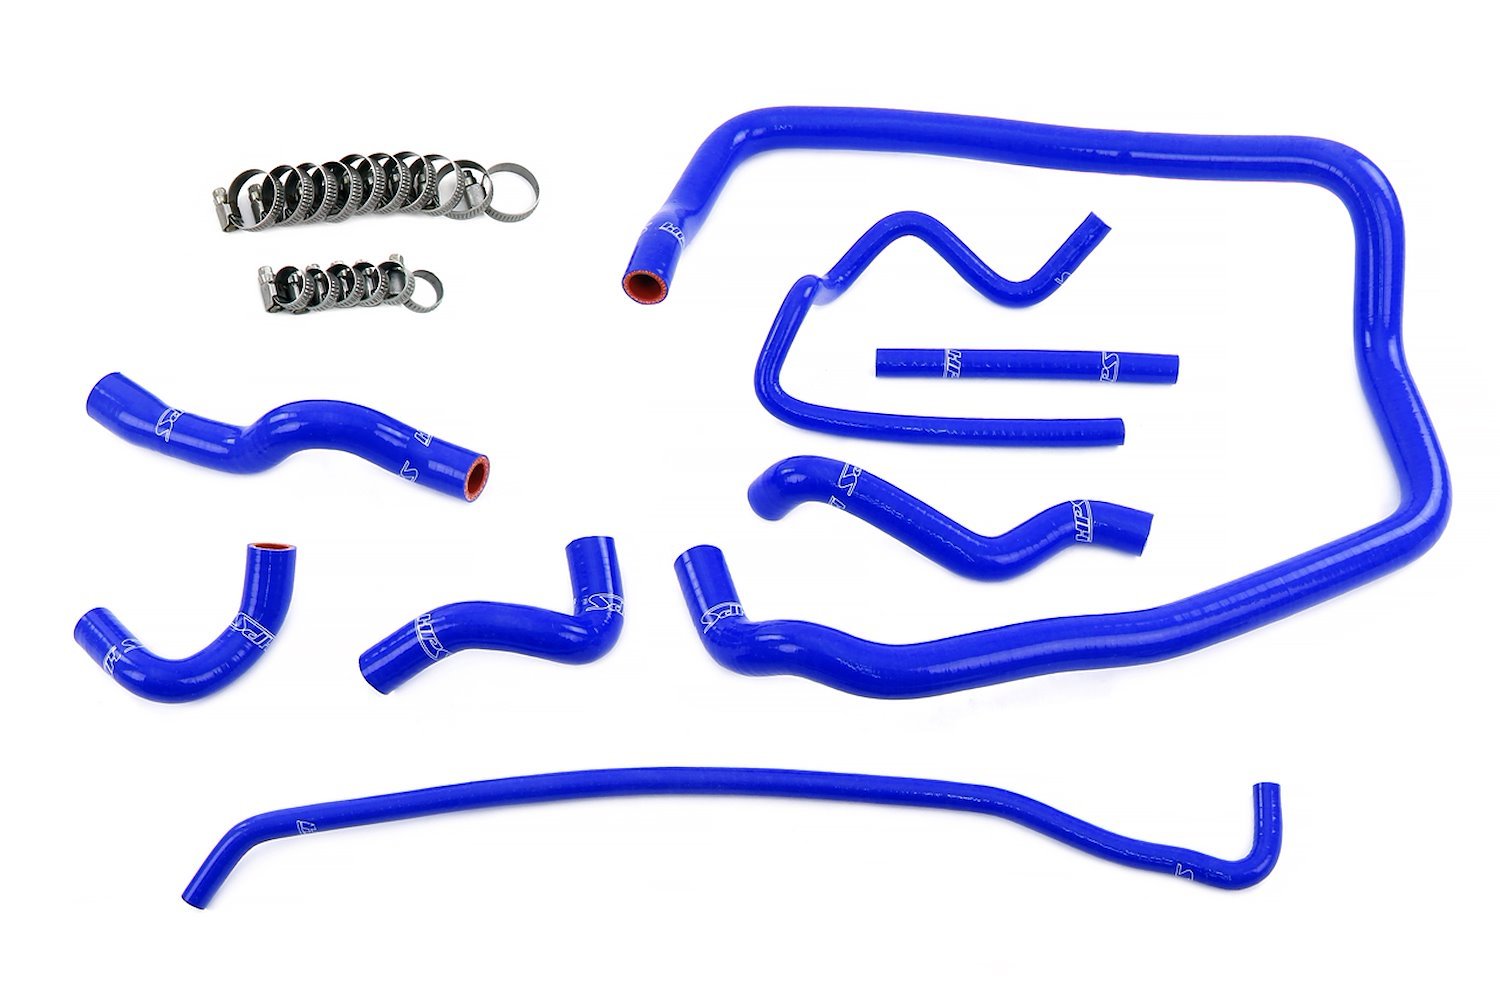 57-2138-BLUE Coolant Hose Kit, 3-Ply Reinforced Silicone, Replaces Heater, Throttle Body, Expansion Tank Hoses